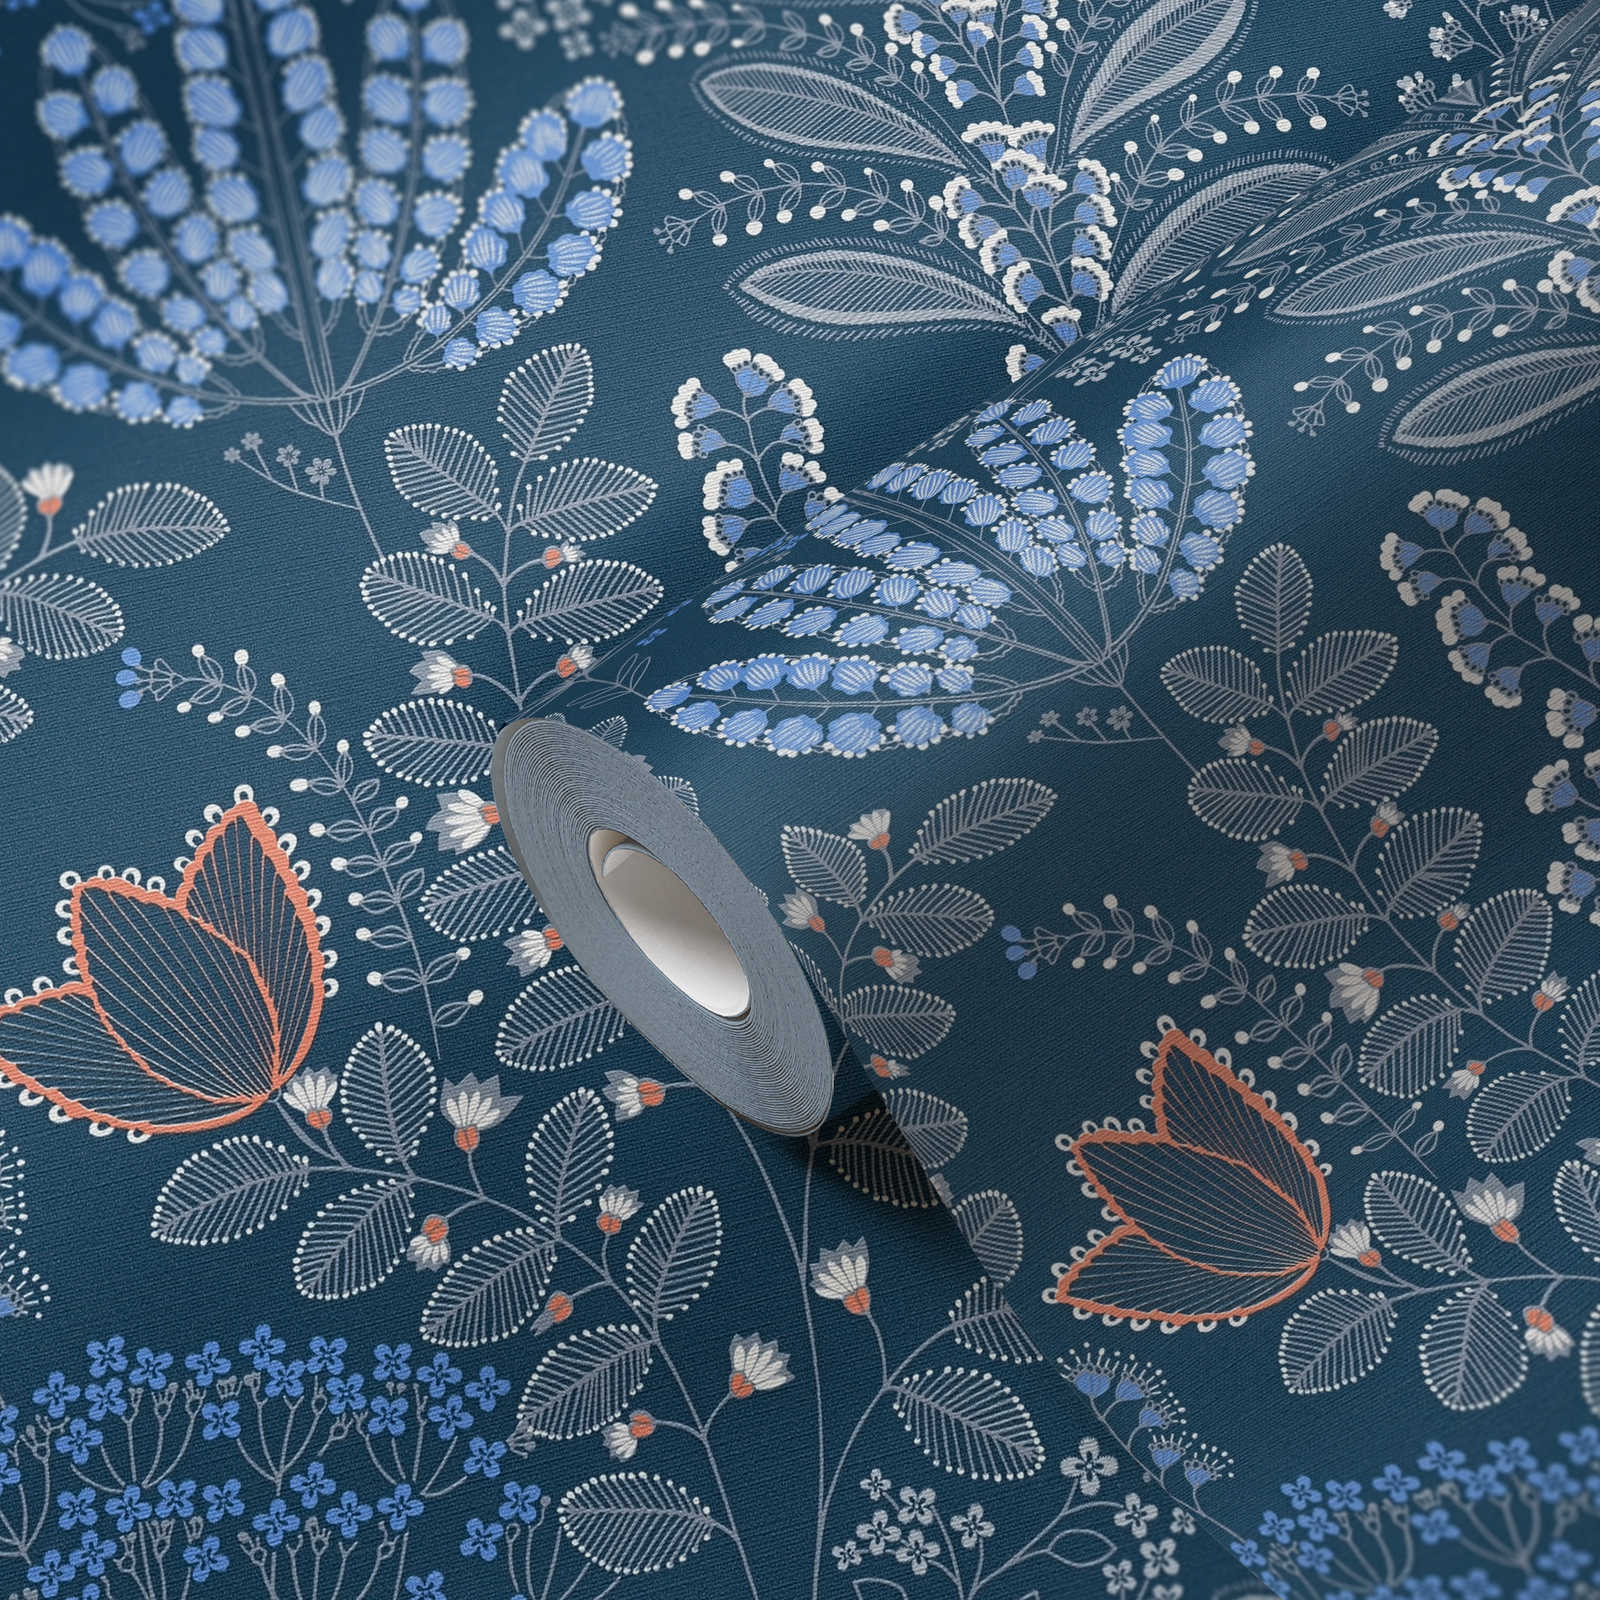             Non-woven wallpaper floral with leaves in retro look light textured, matt - blue, white, grey
        